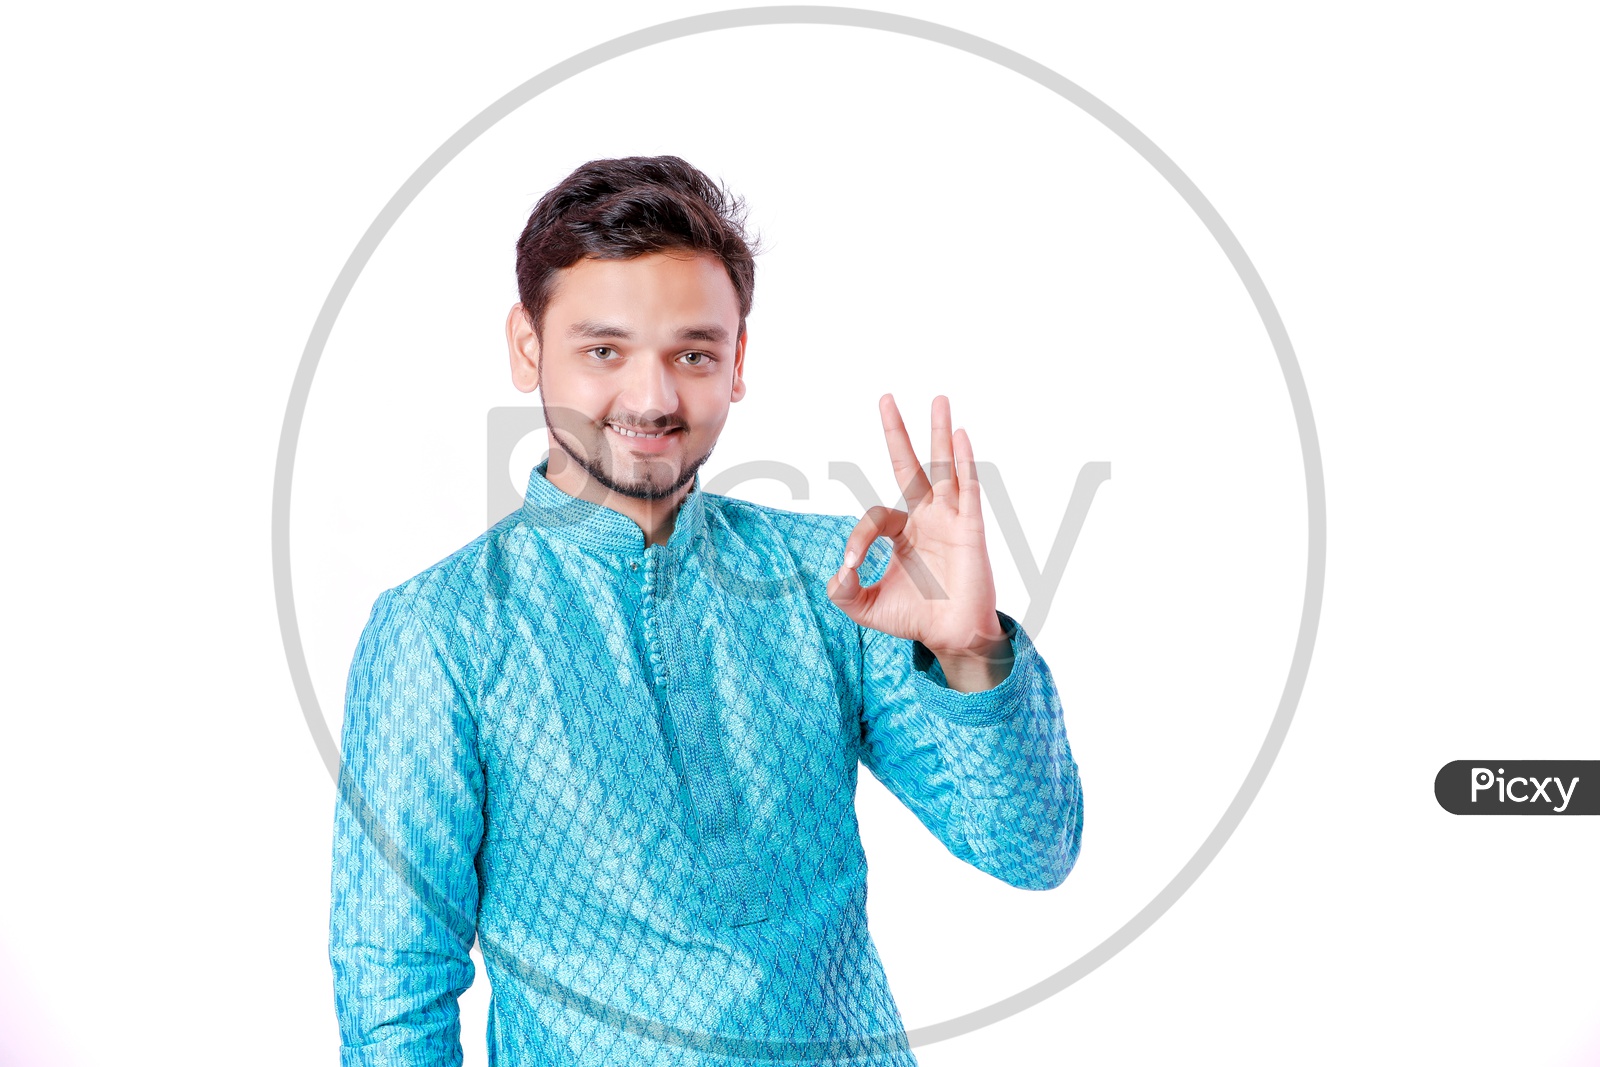 Indian Young Professional Man With a Smiling Face and Doing Gestures   On an Isolated White Background